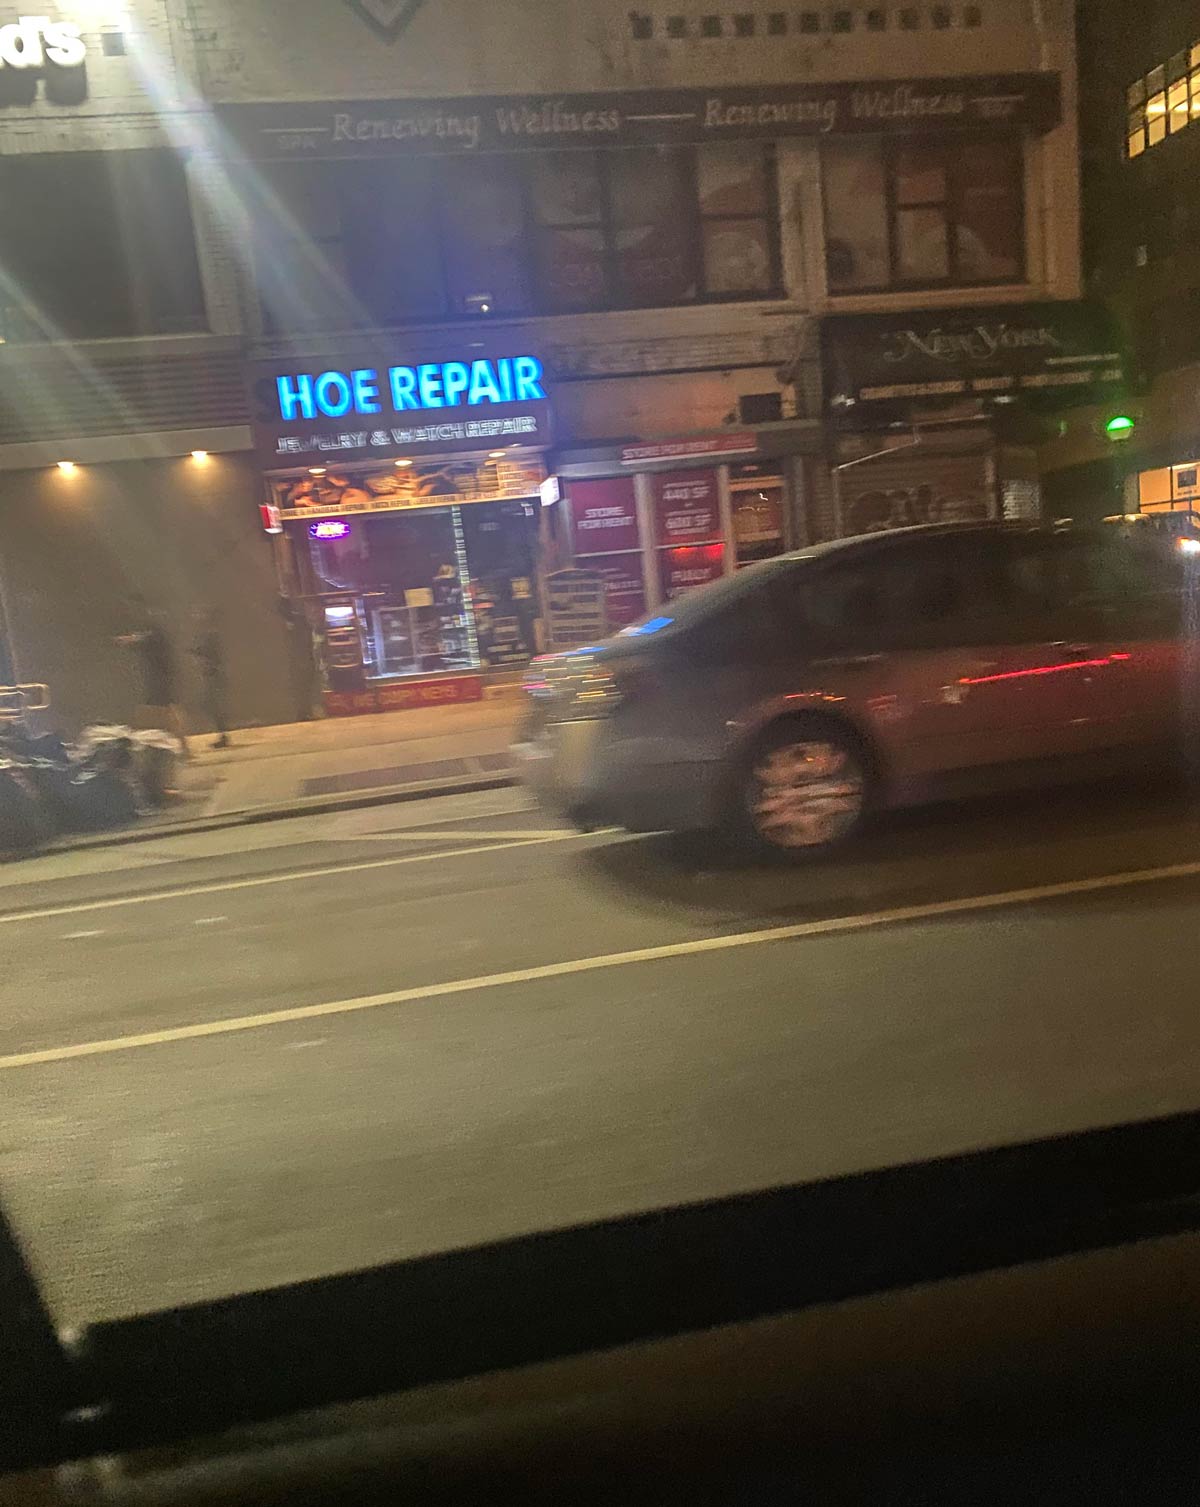 Get your hoe repaired!